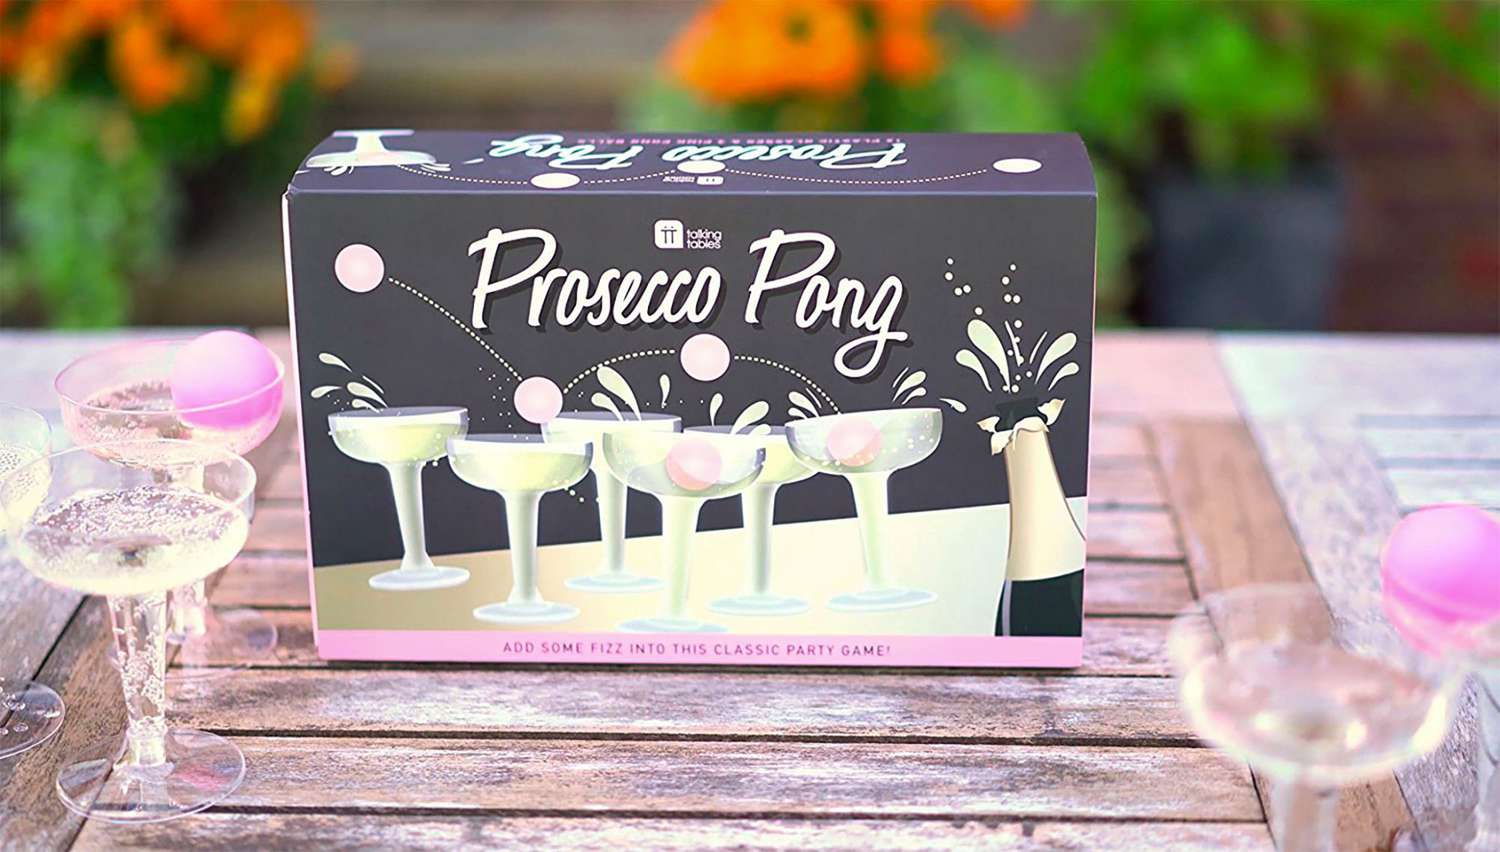 prosecco pong party game set on outdoor table